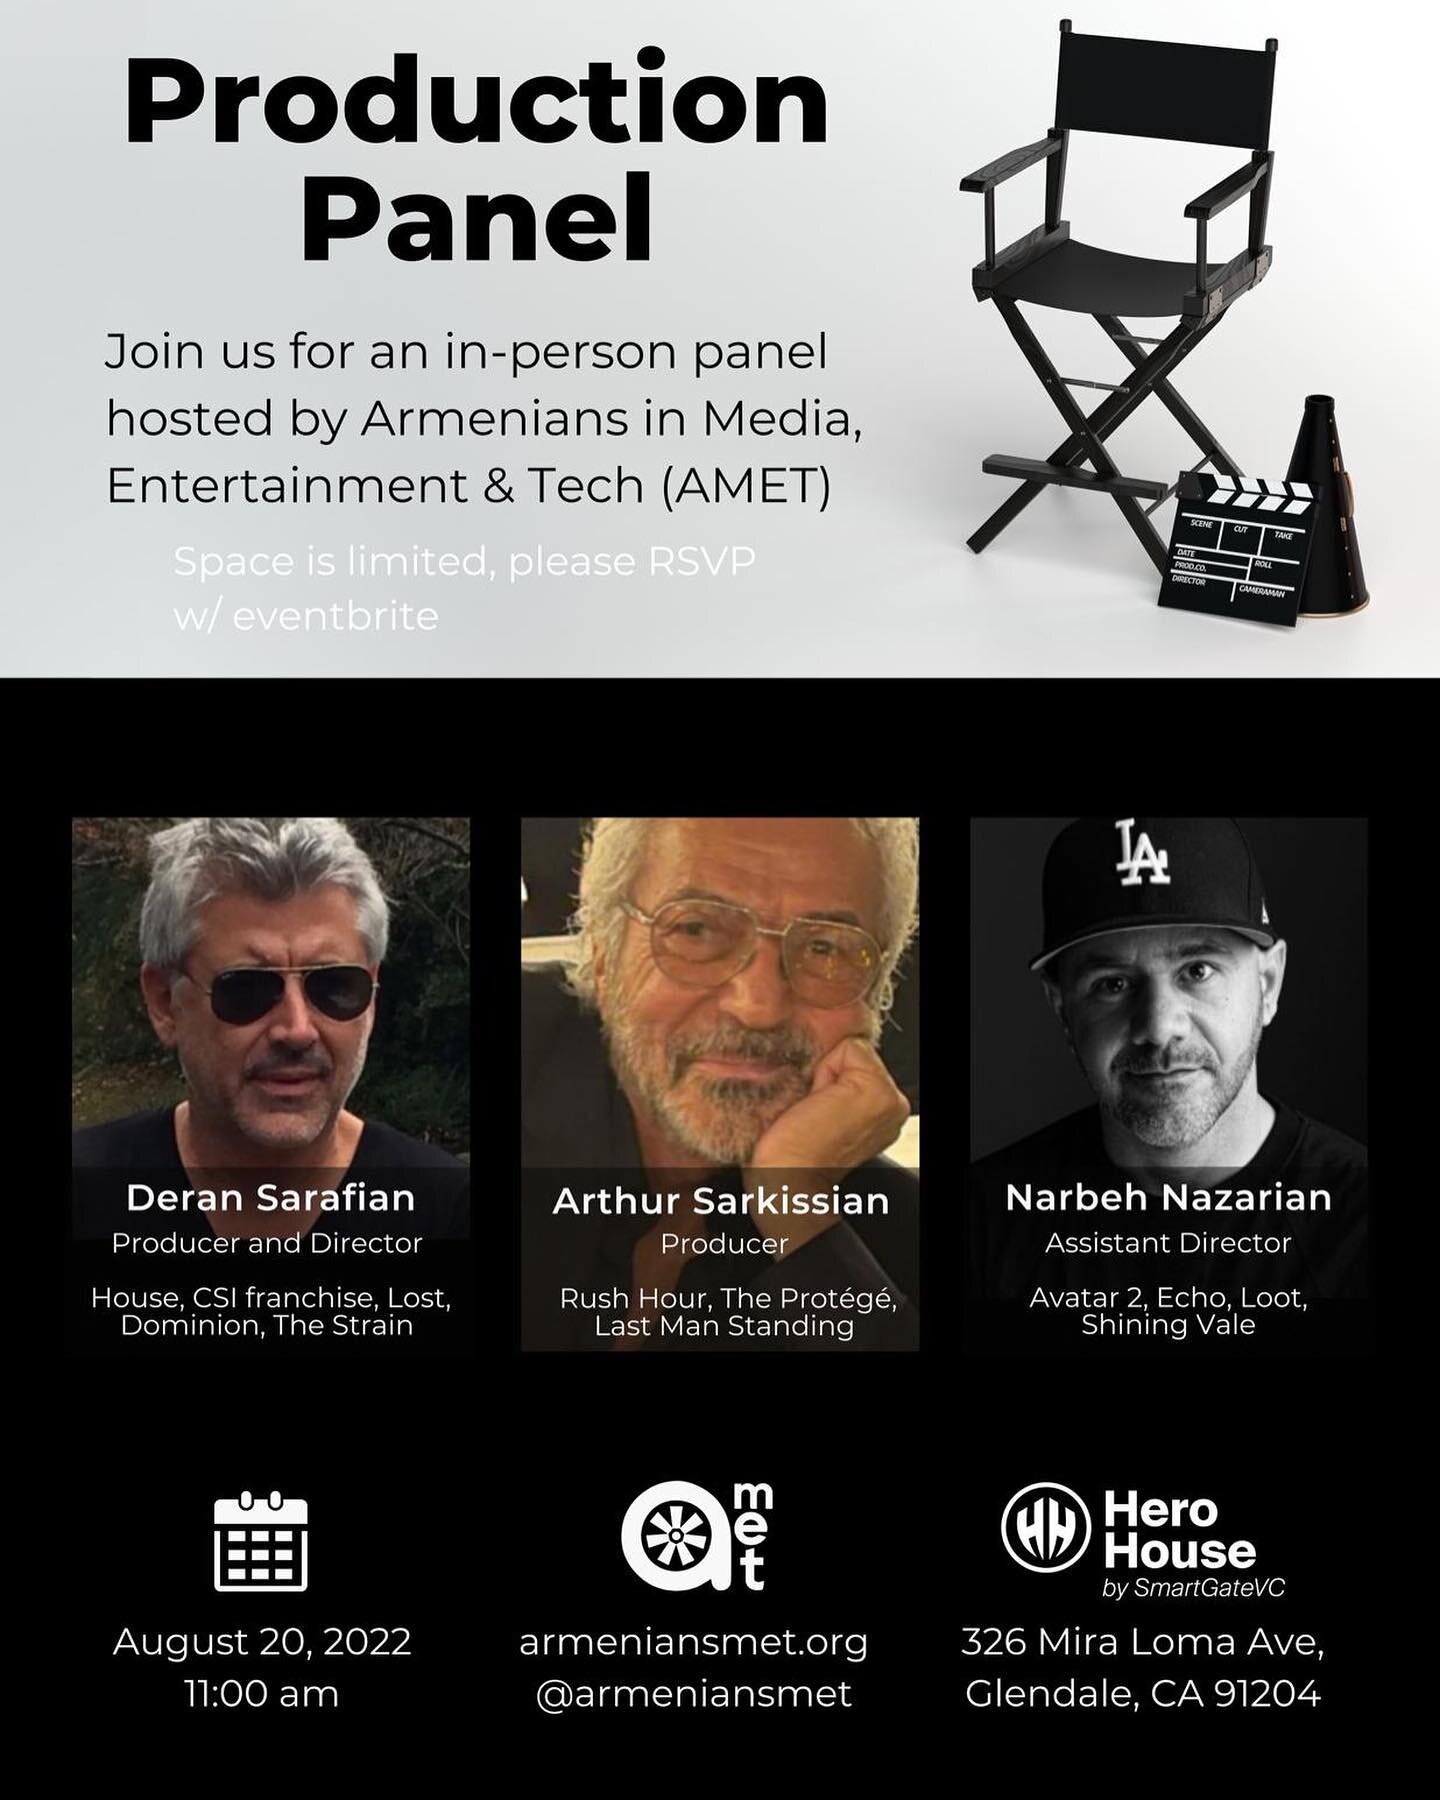 AMET Chats: Production
 
Join us for an in-person panel on Saturday, August 20th at @herohouse.io in Los Angeles to learn more about film and TV production! We&rsquo;ll be joined by Deran Sarafian, Arthur Sarkissian, and Narbeh Nazarian who will give